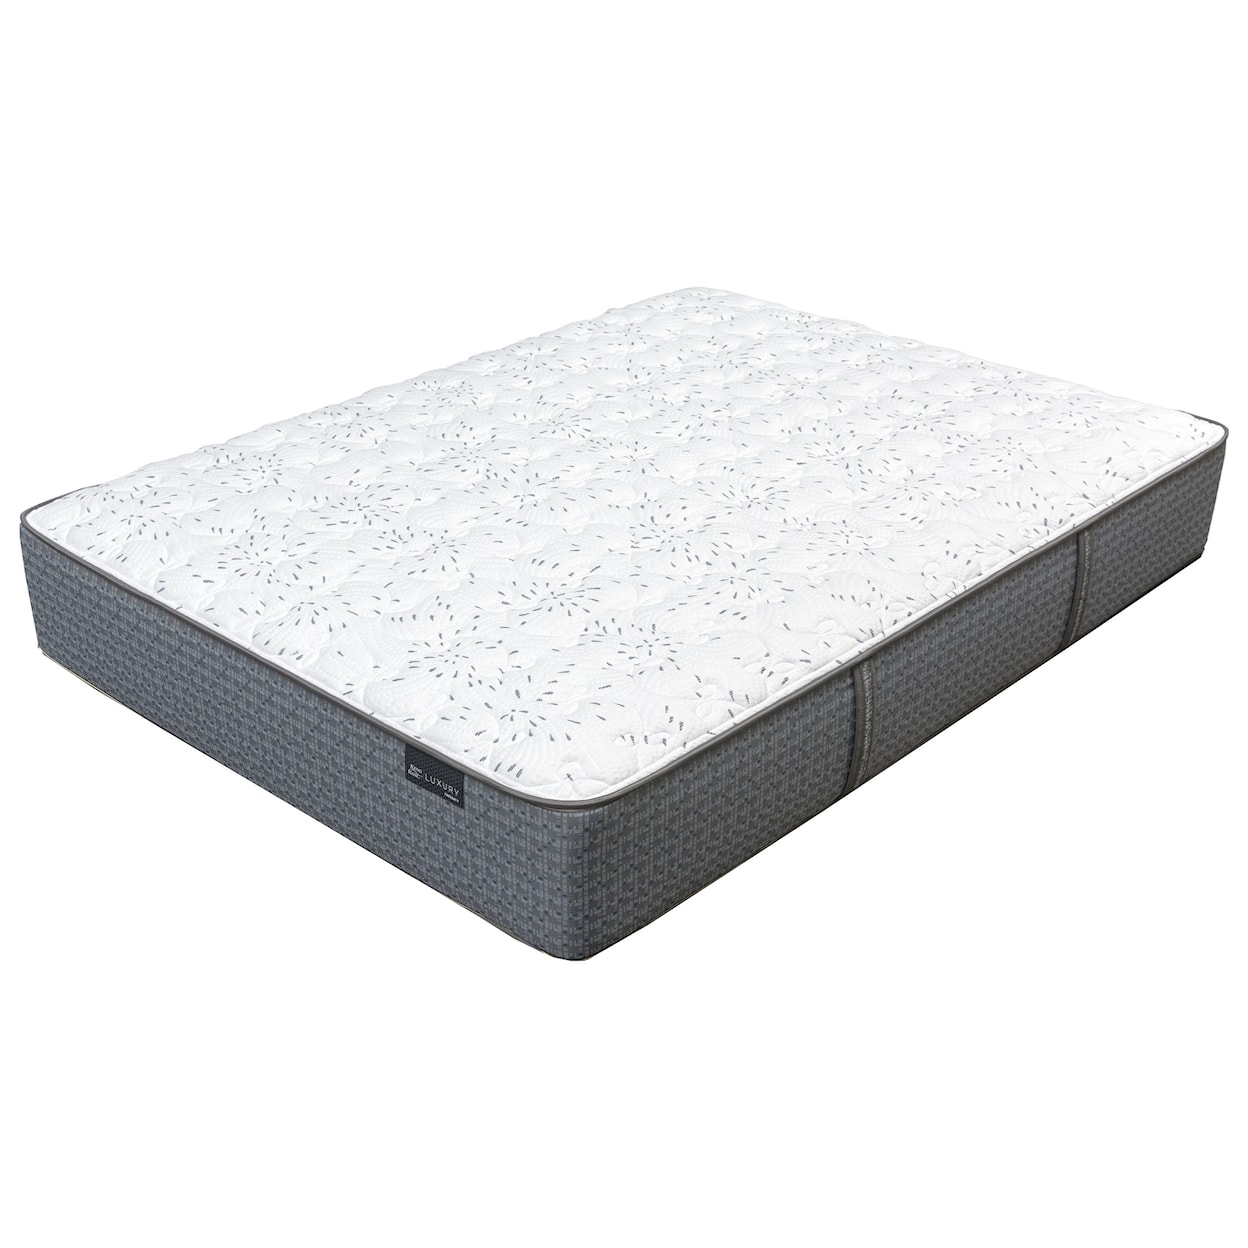 King Koil Pineview XF King 12" Extra Firm Mattress